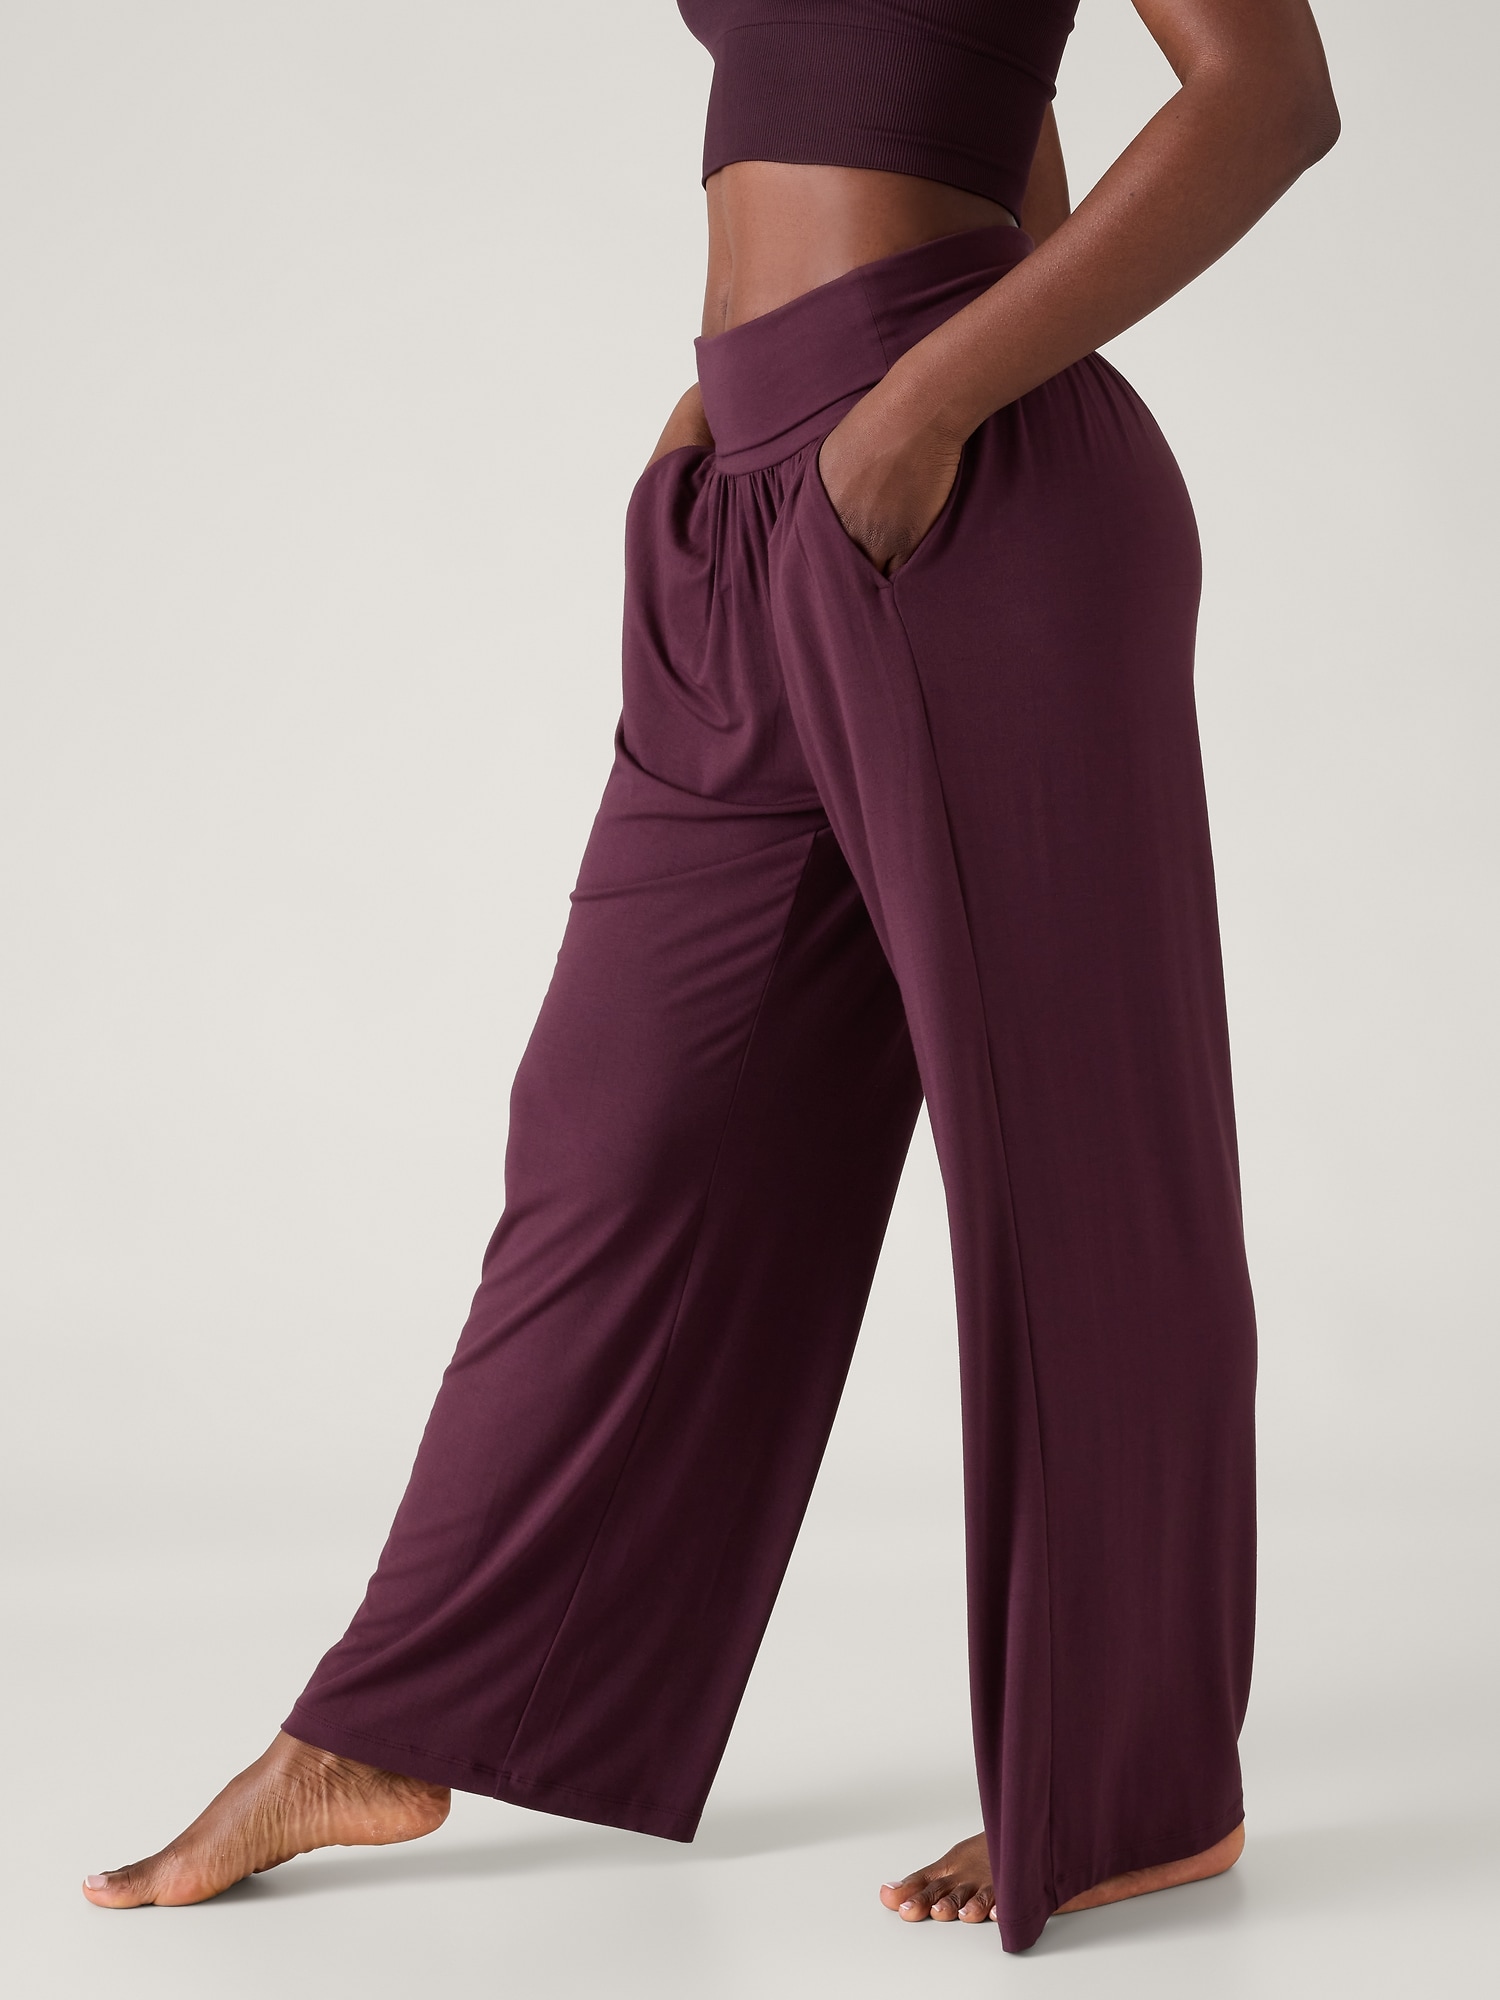 Athleta Cosmic Wide Leg Pant In Black Size 18 - $57 - From Julie